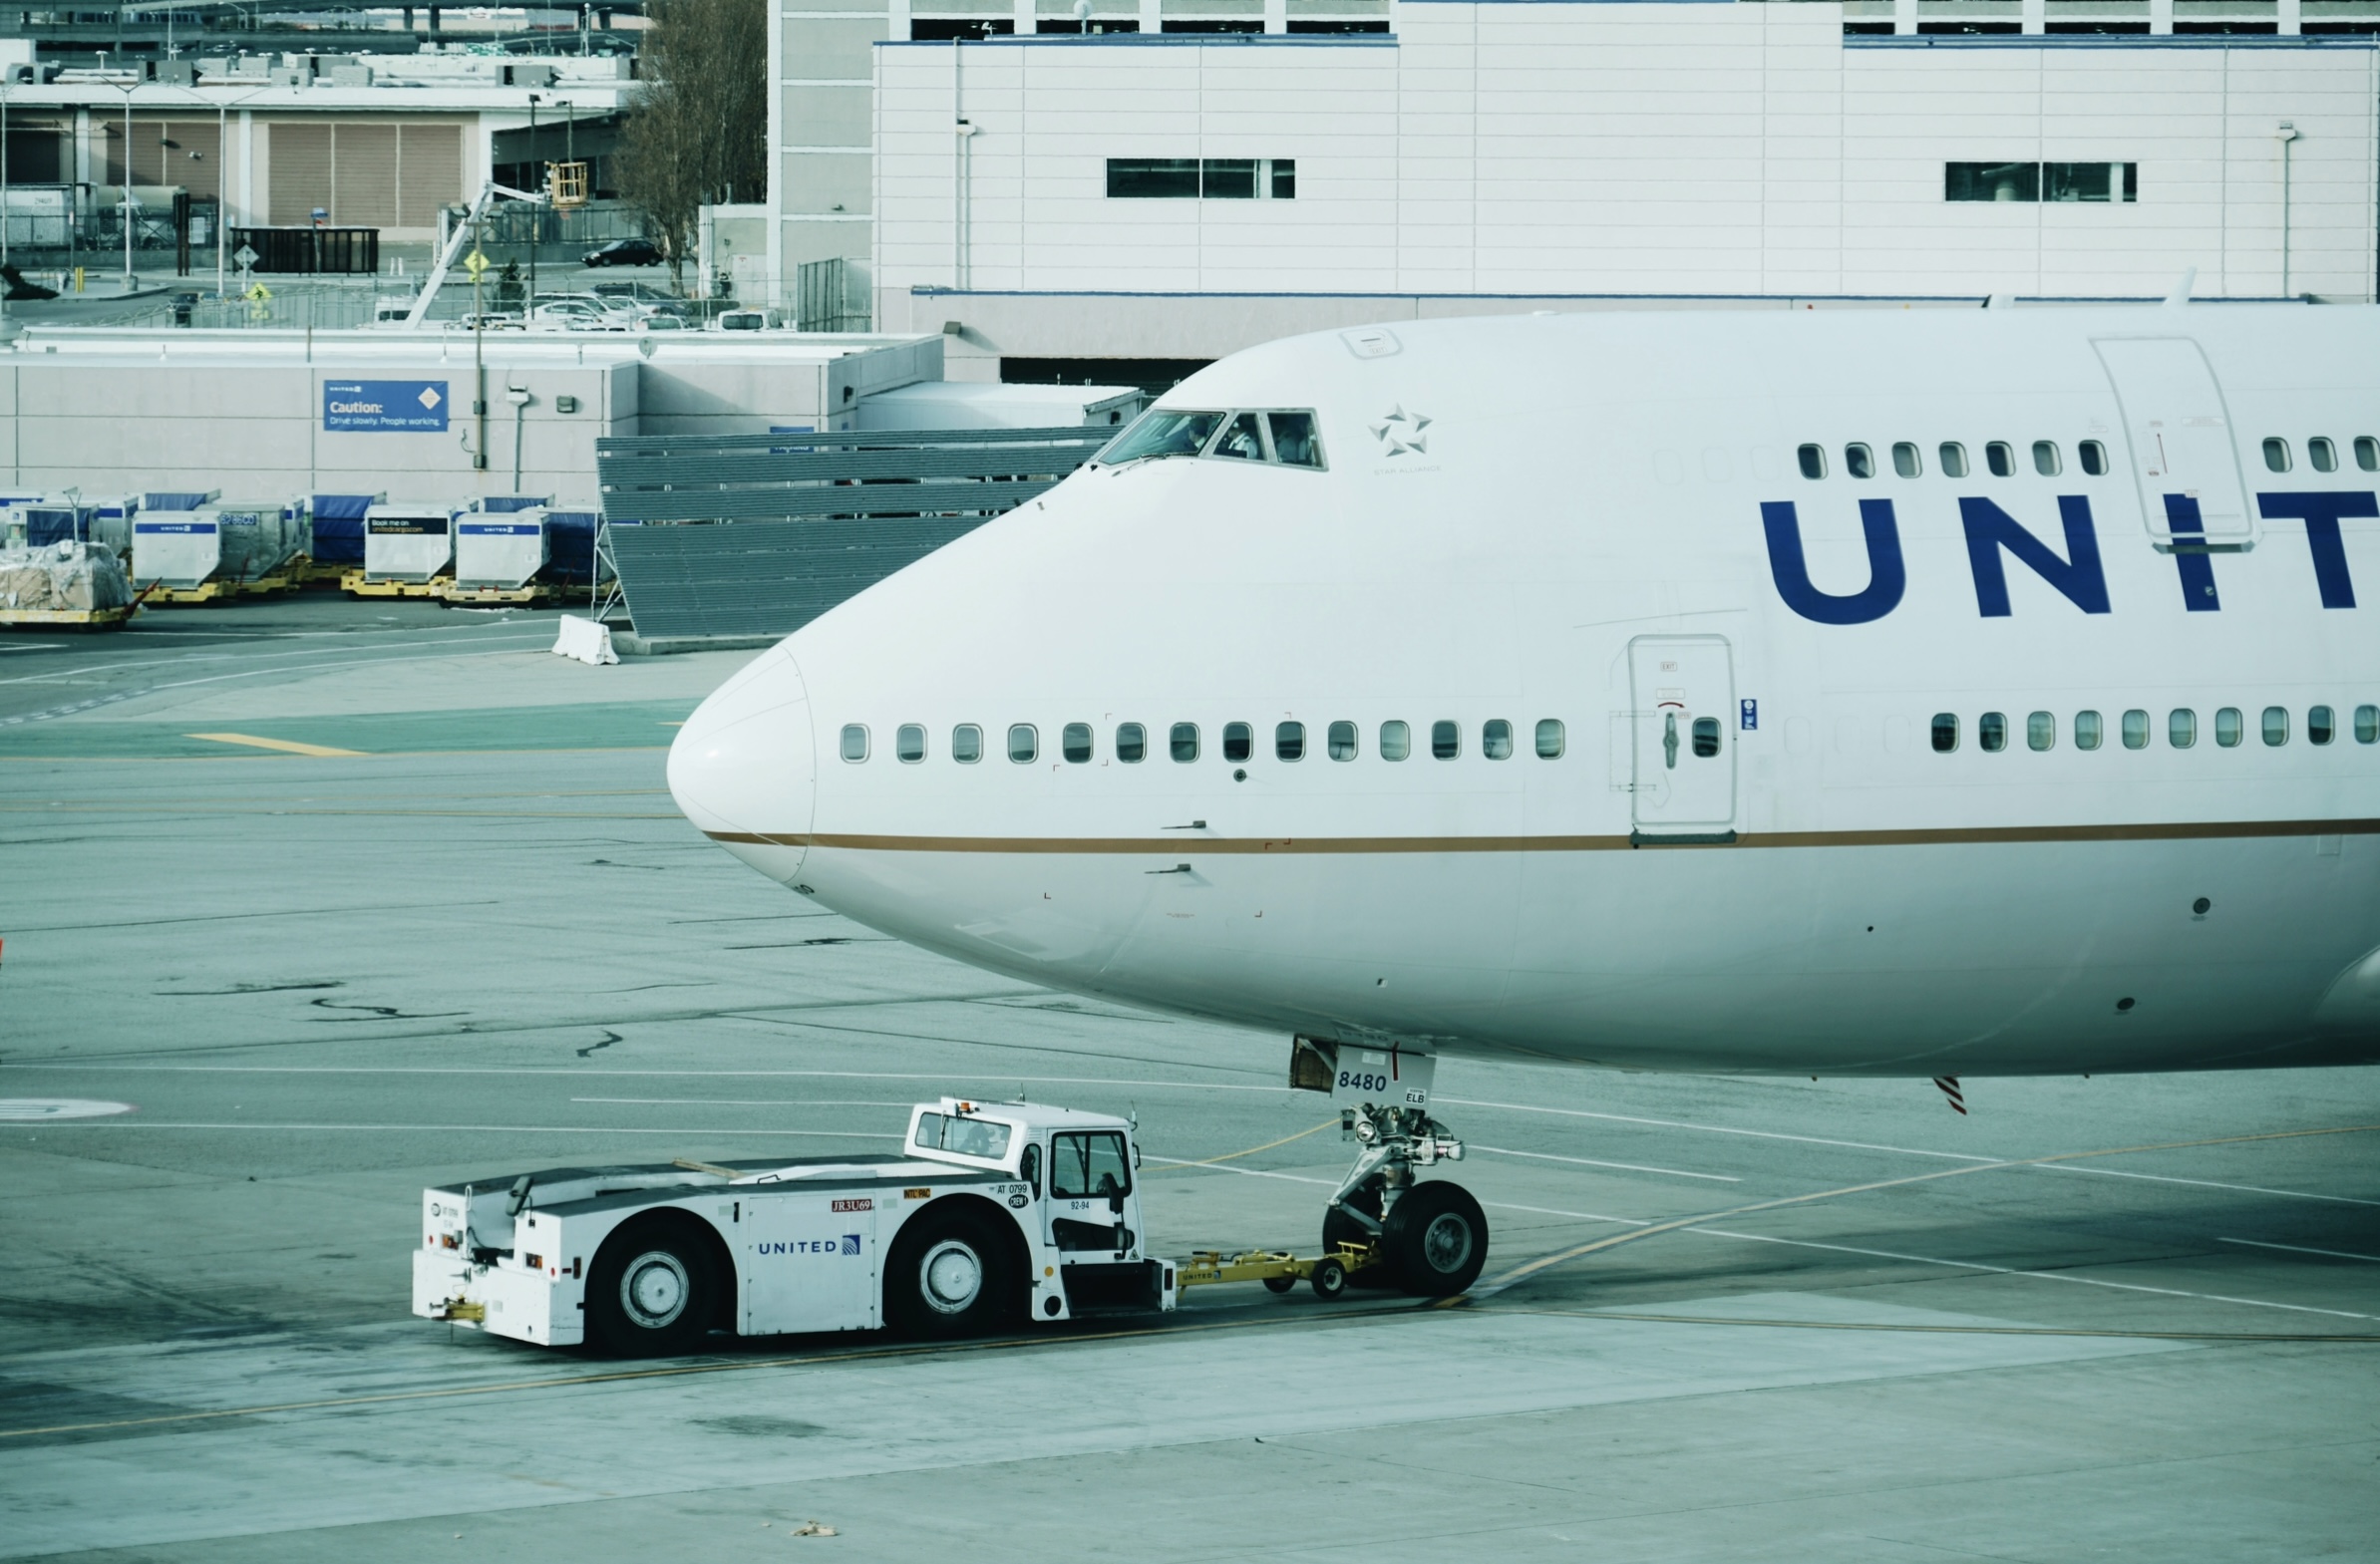 These major U.S. airlines have significant Boeing aircrafts on their fleet. 
Pictured: a United airplane on the airport runway